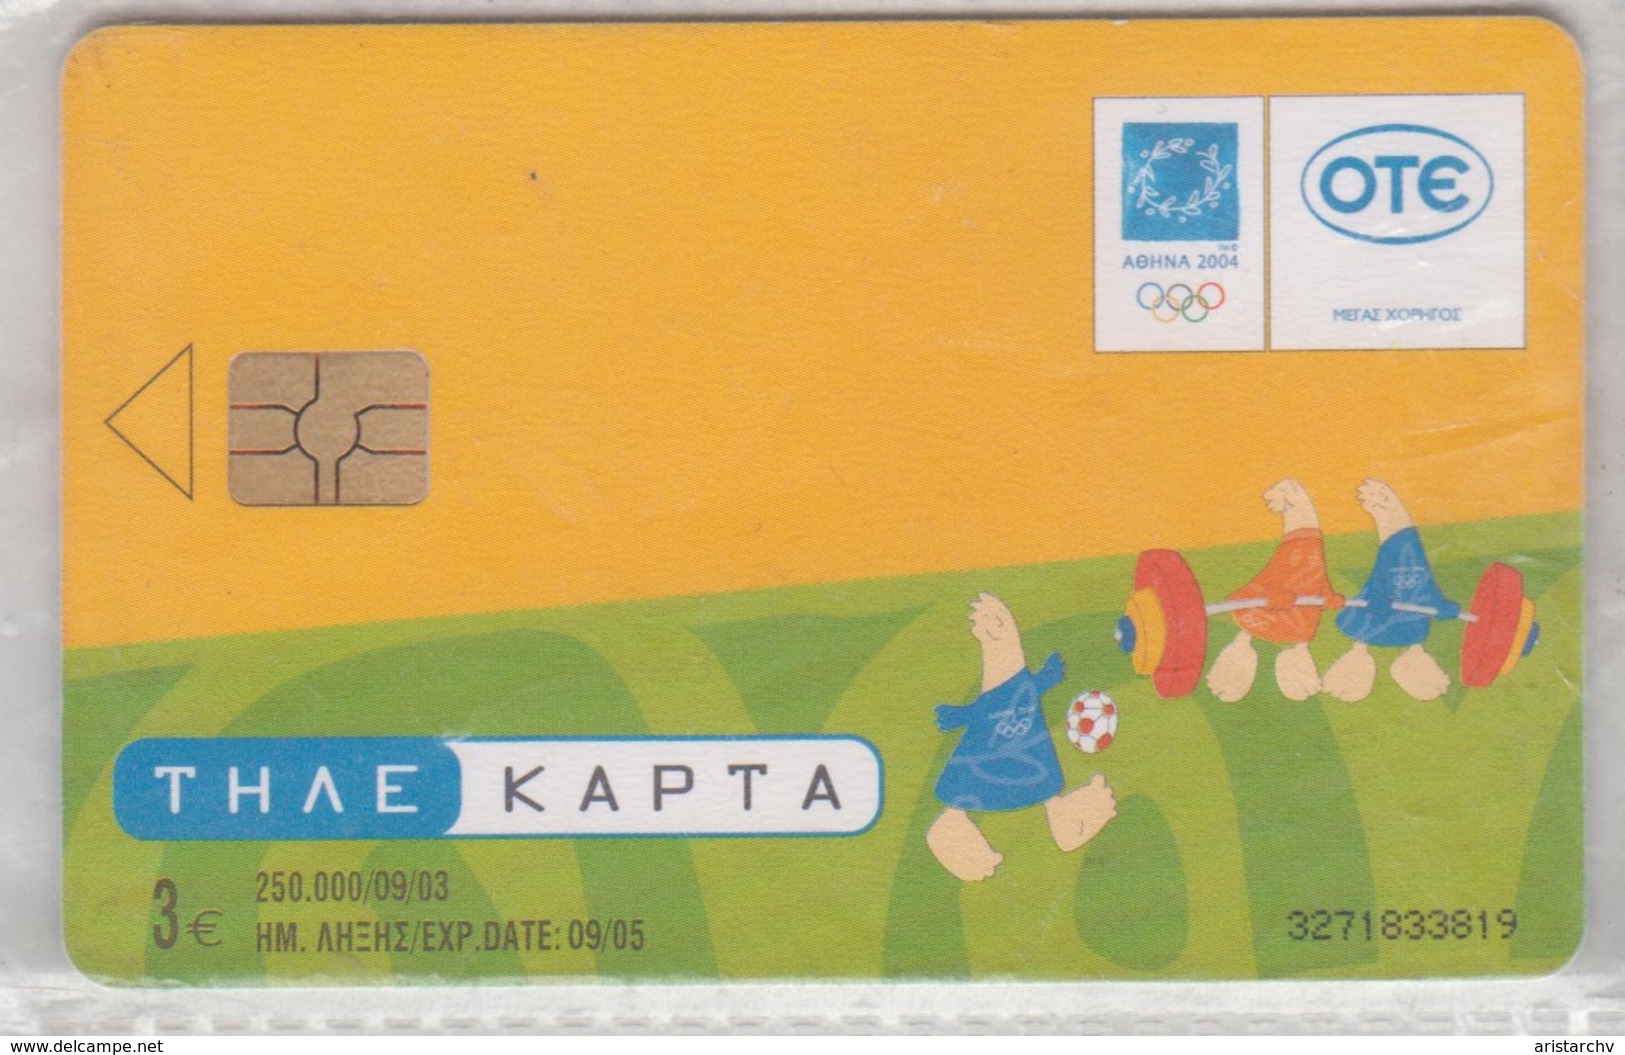 GREECE 2004 OLYMPIC GAMES ATHENS FOOTBALL WEIGHTLIFTING ARCHERY SWIMMING BADMINTON EQUESTRIAN - Olympische Spiele